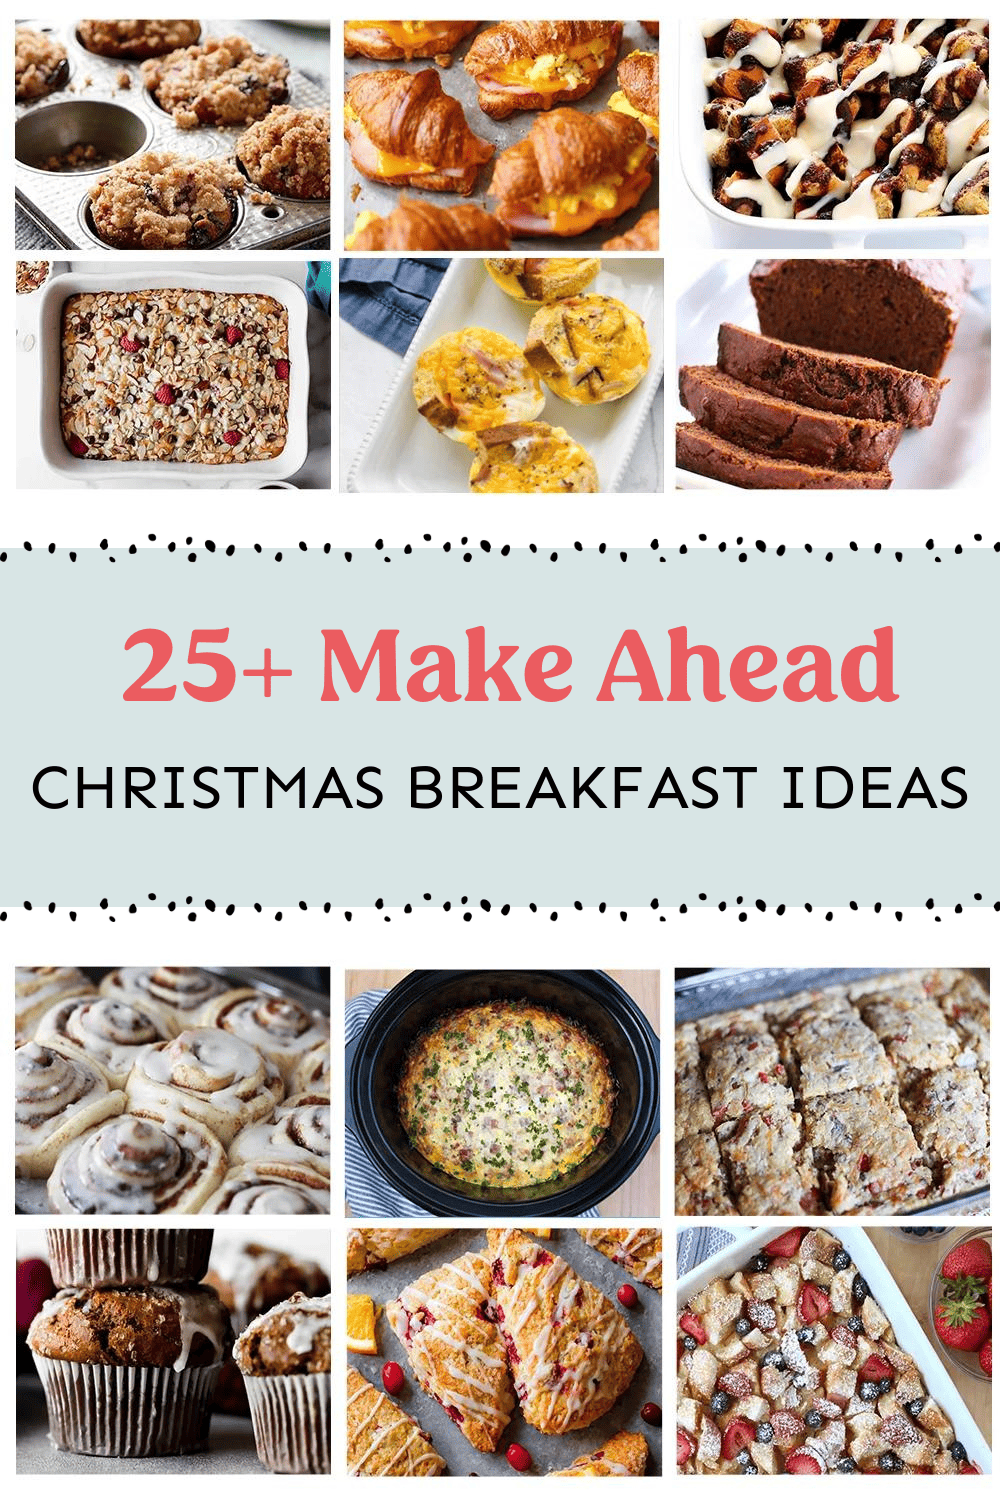 Collage image of various make-ahead breakfast ideas for Christmas.